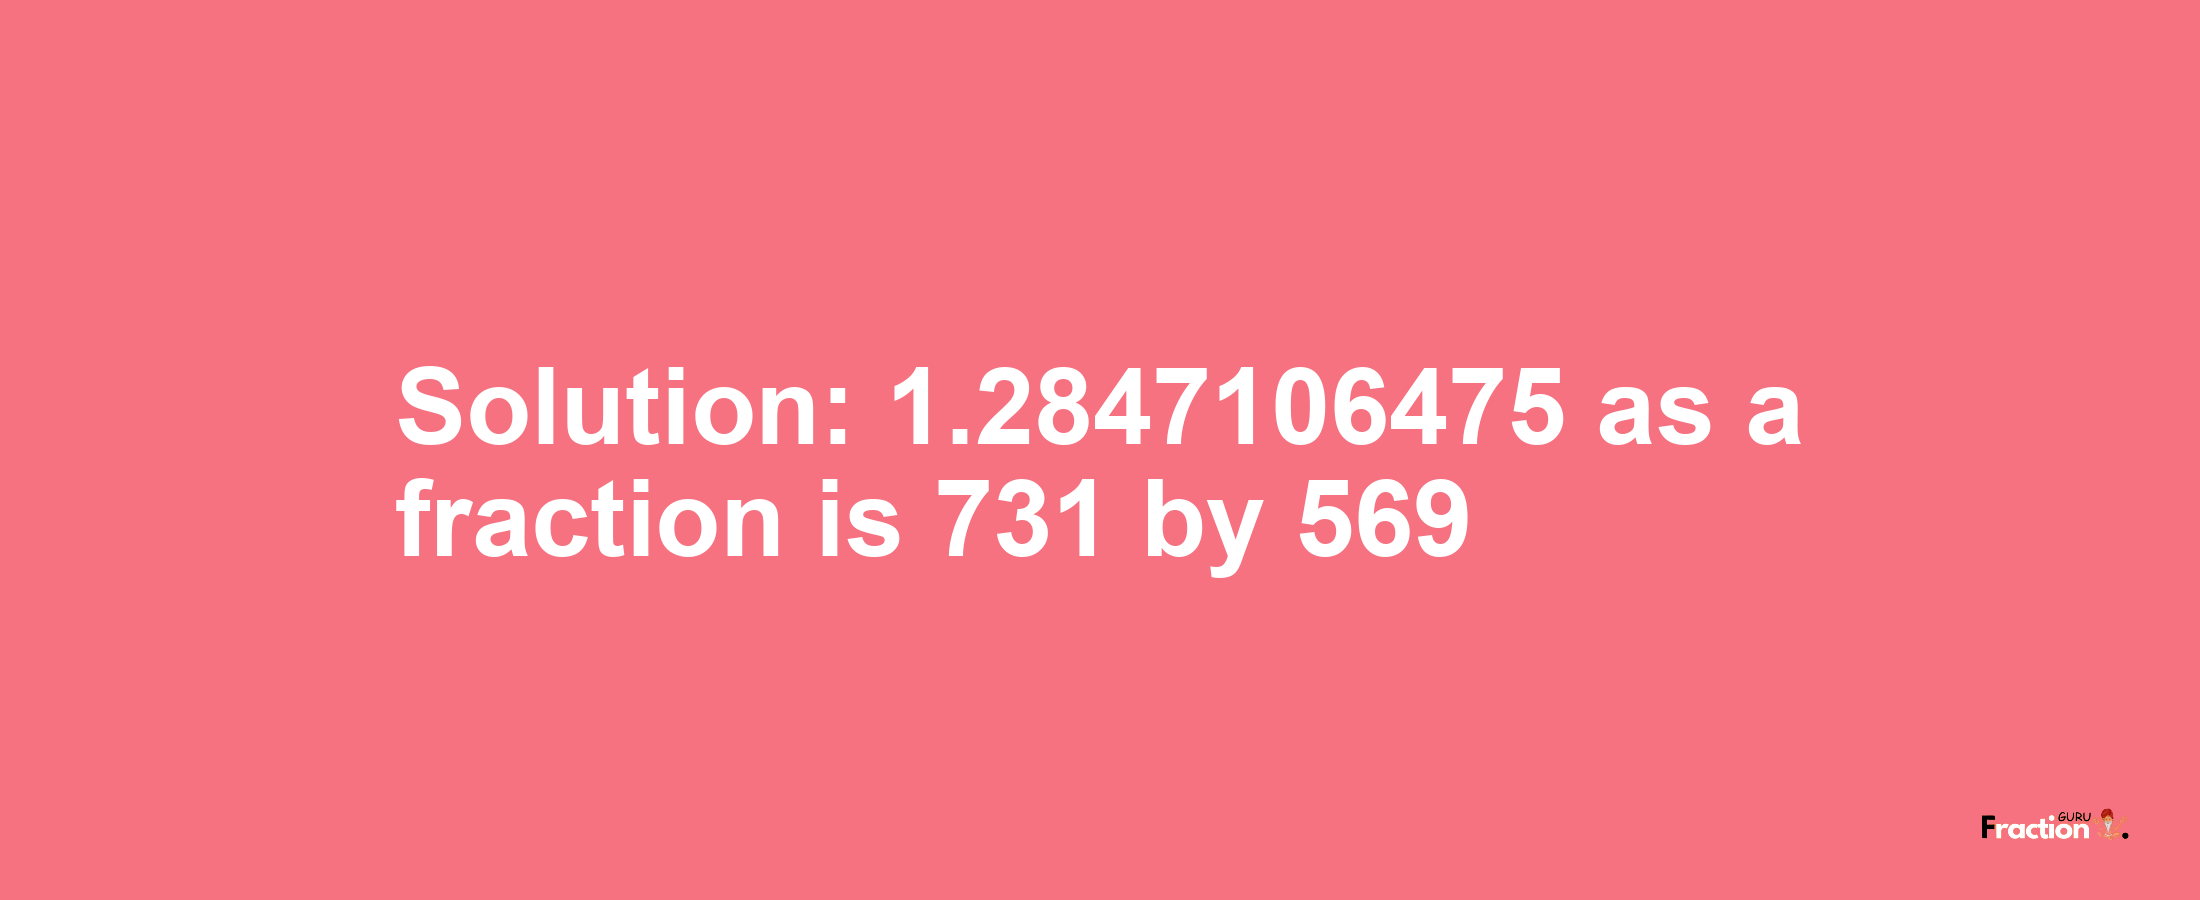 Solution:1.2847106475 as a fraction is 731/569